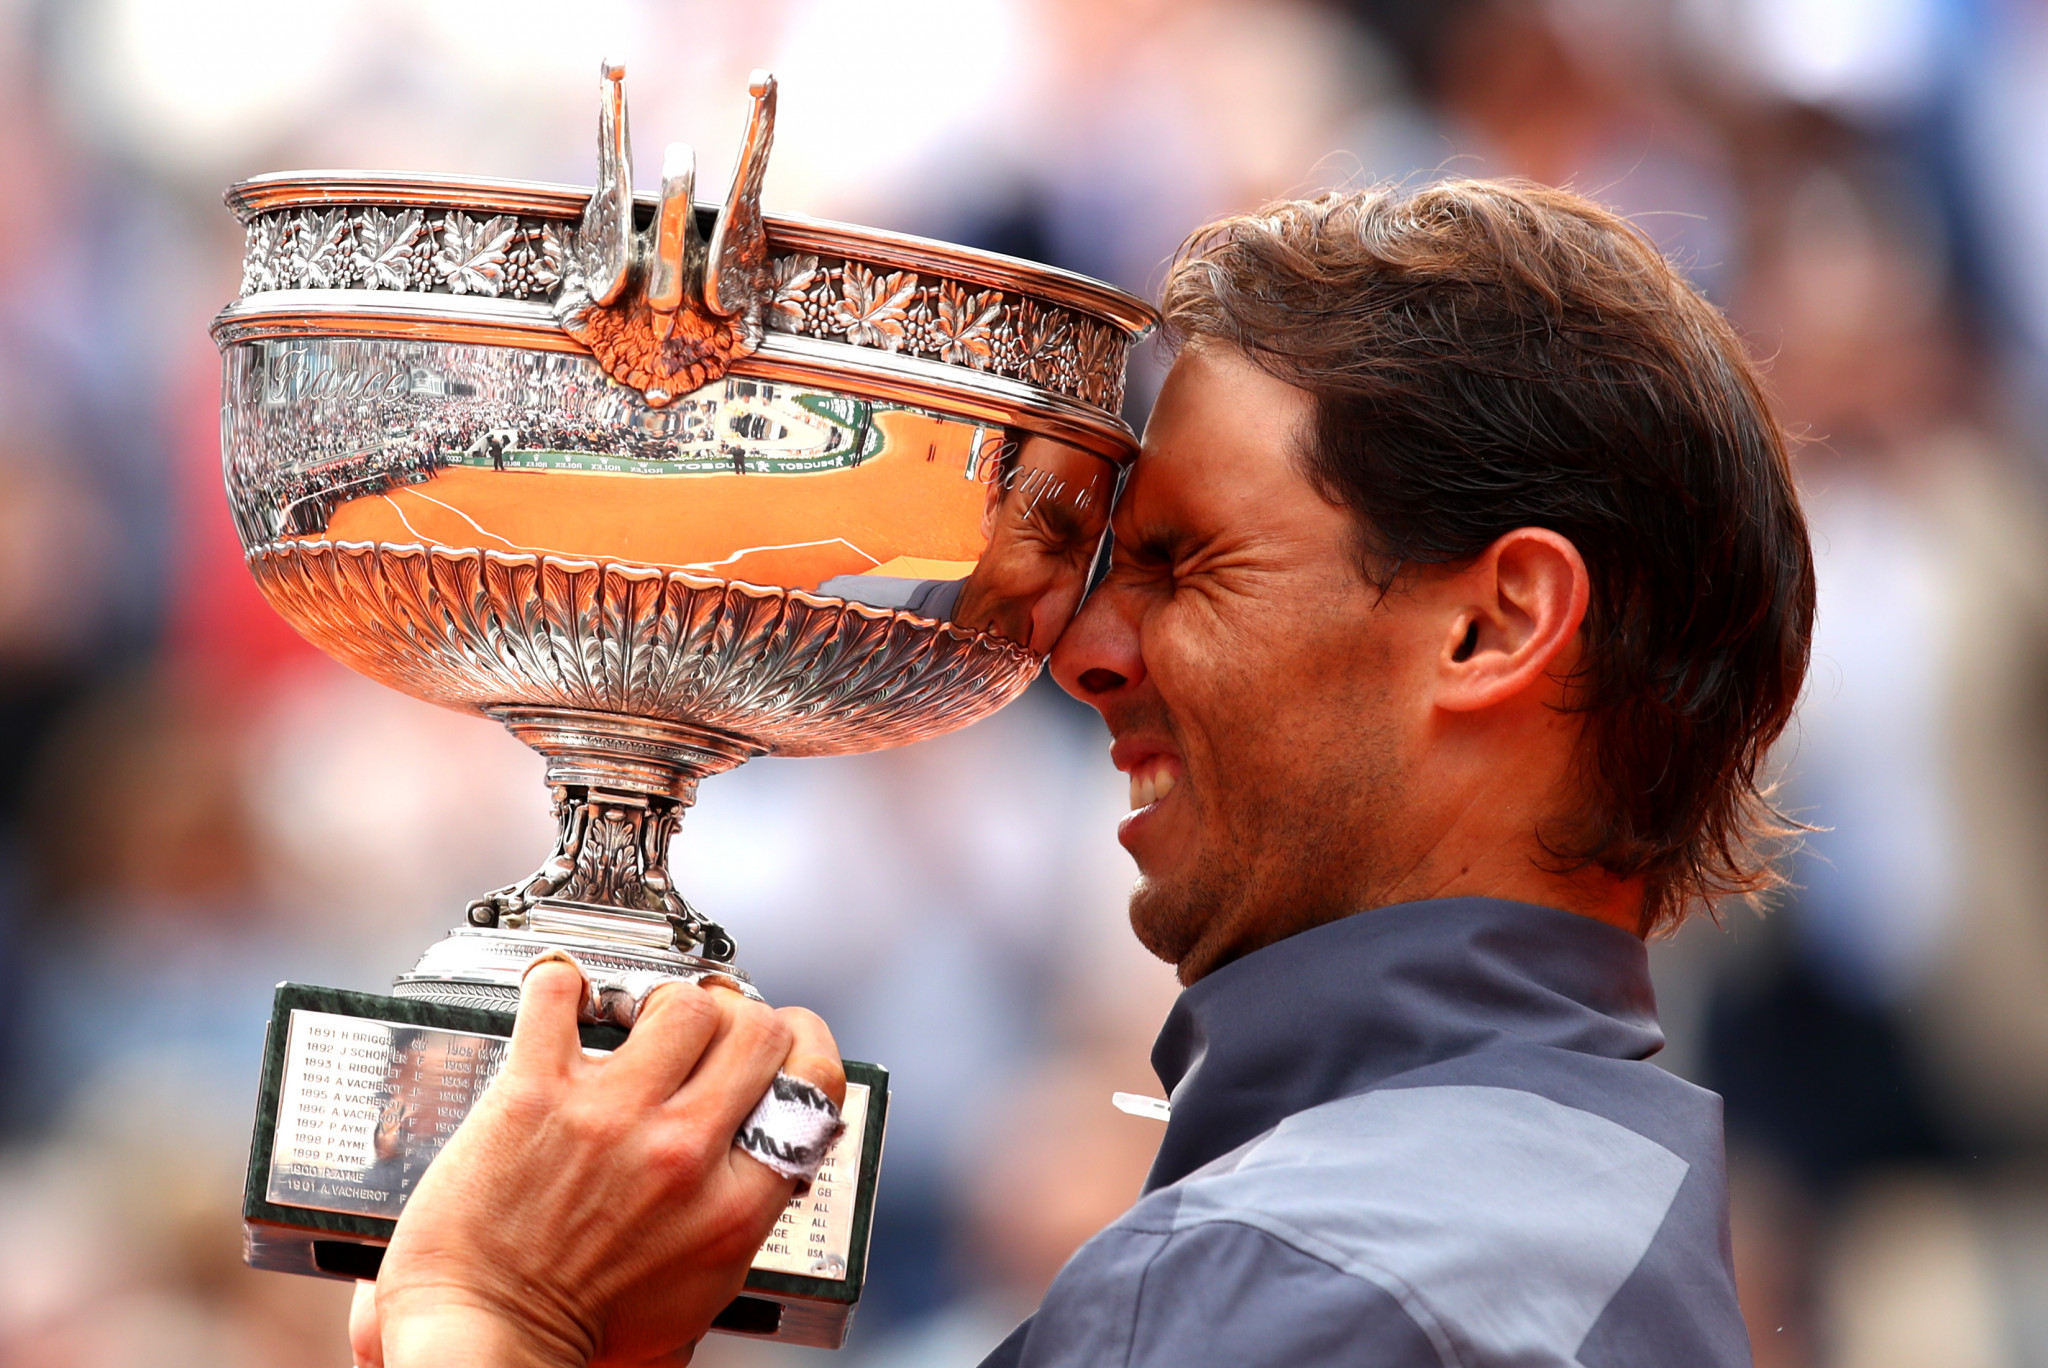 "King of Clay" Nadal sees off Thiem to claim 12th French Open title